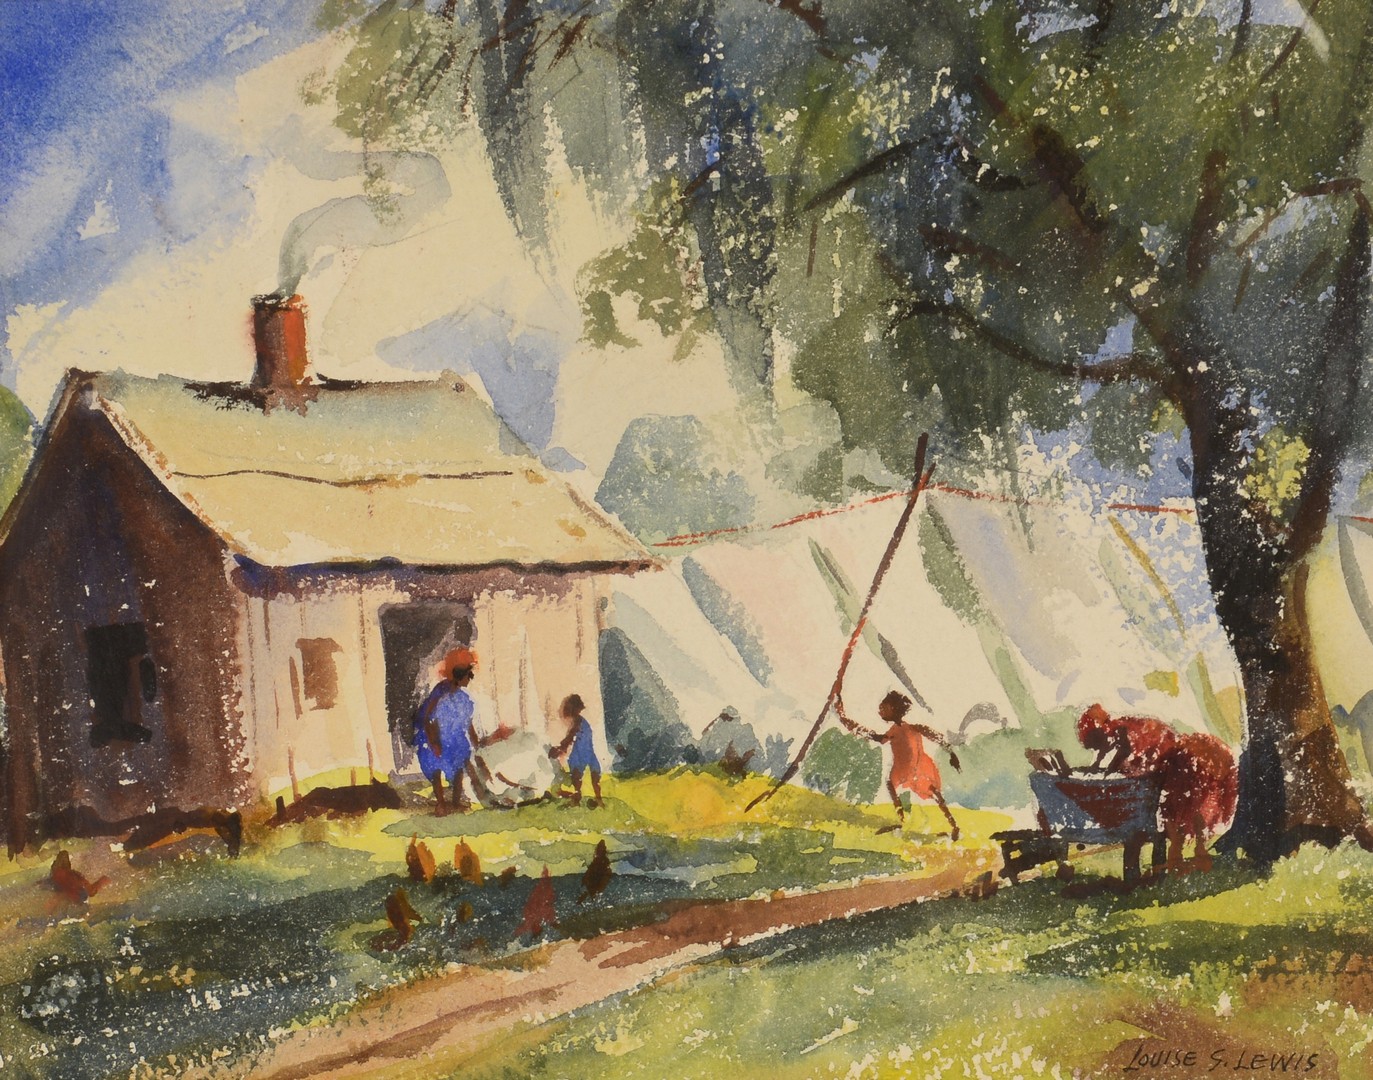 Lot 175: 2 Watercolors of African-American Homesteads, incl